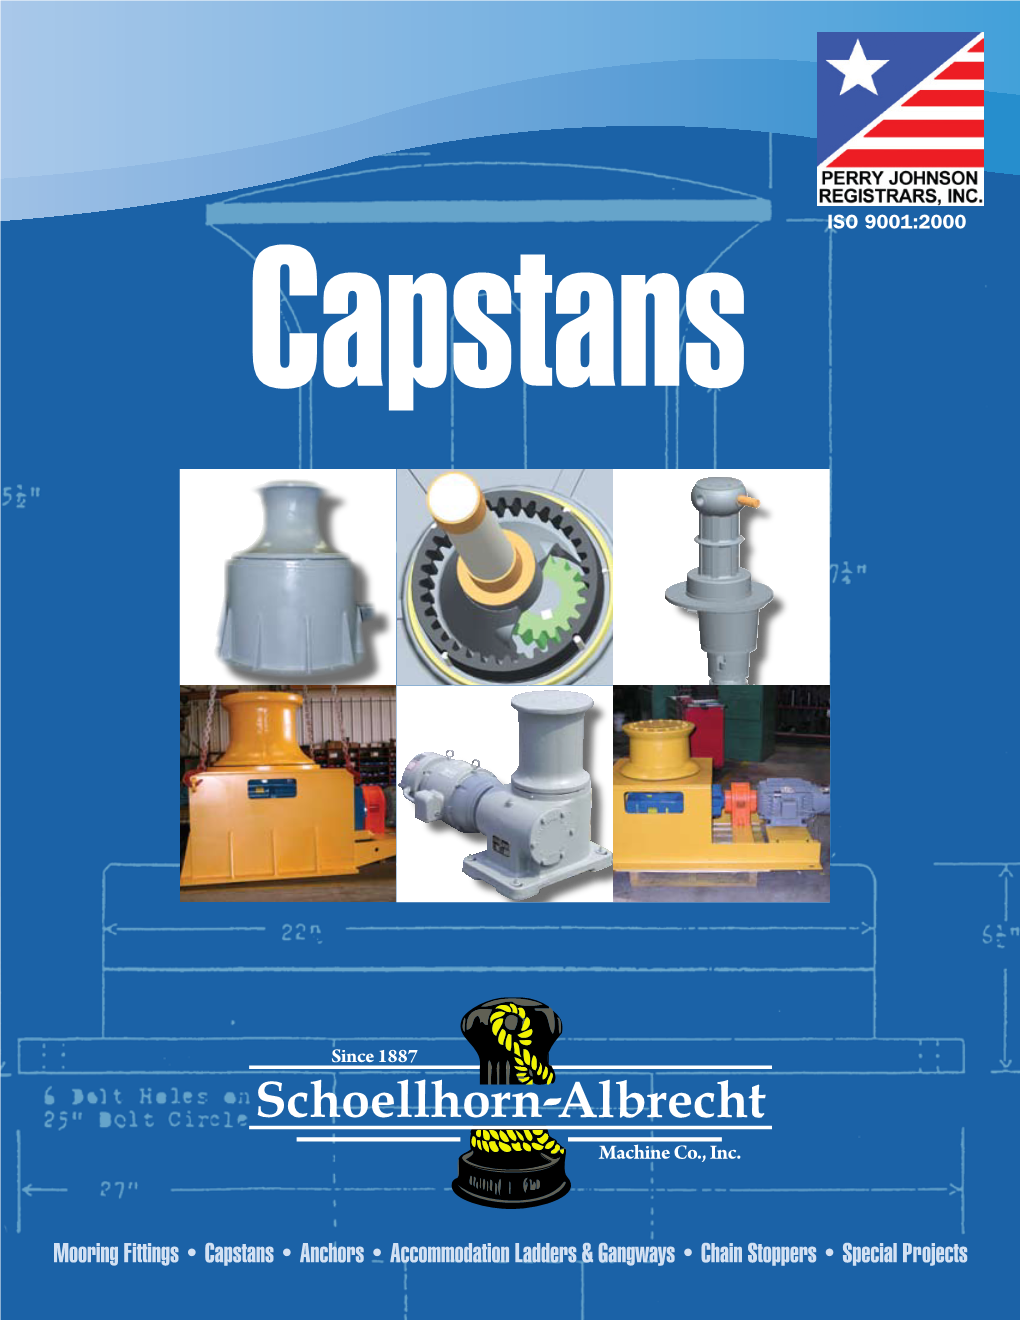 Mooring Fittings • Capstans • Anchors • Accommodation Ladders